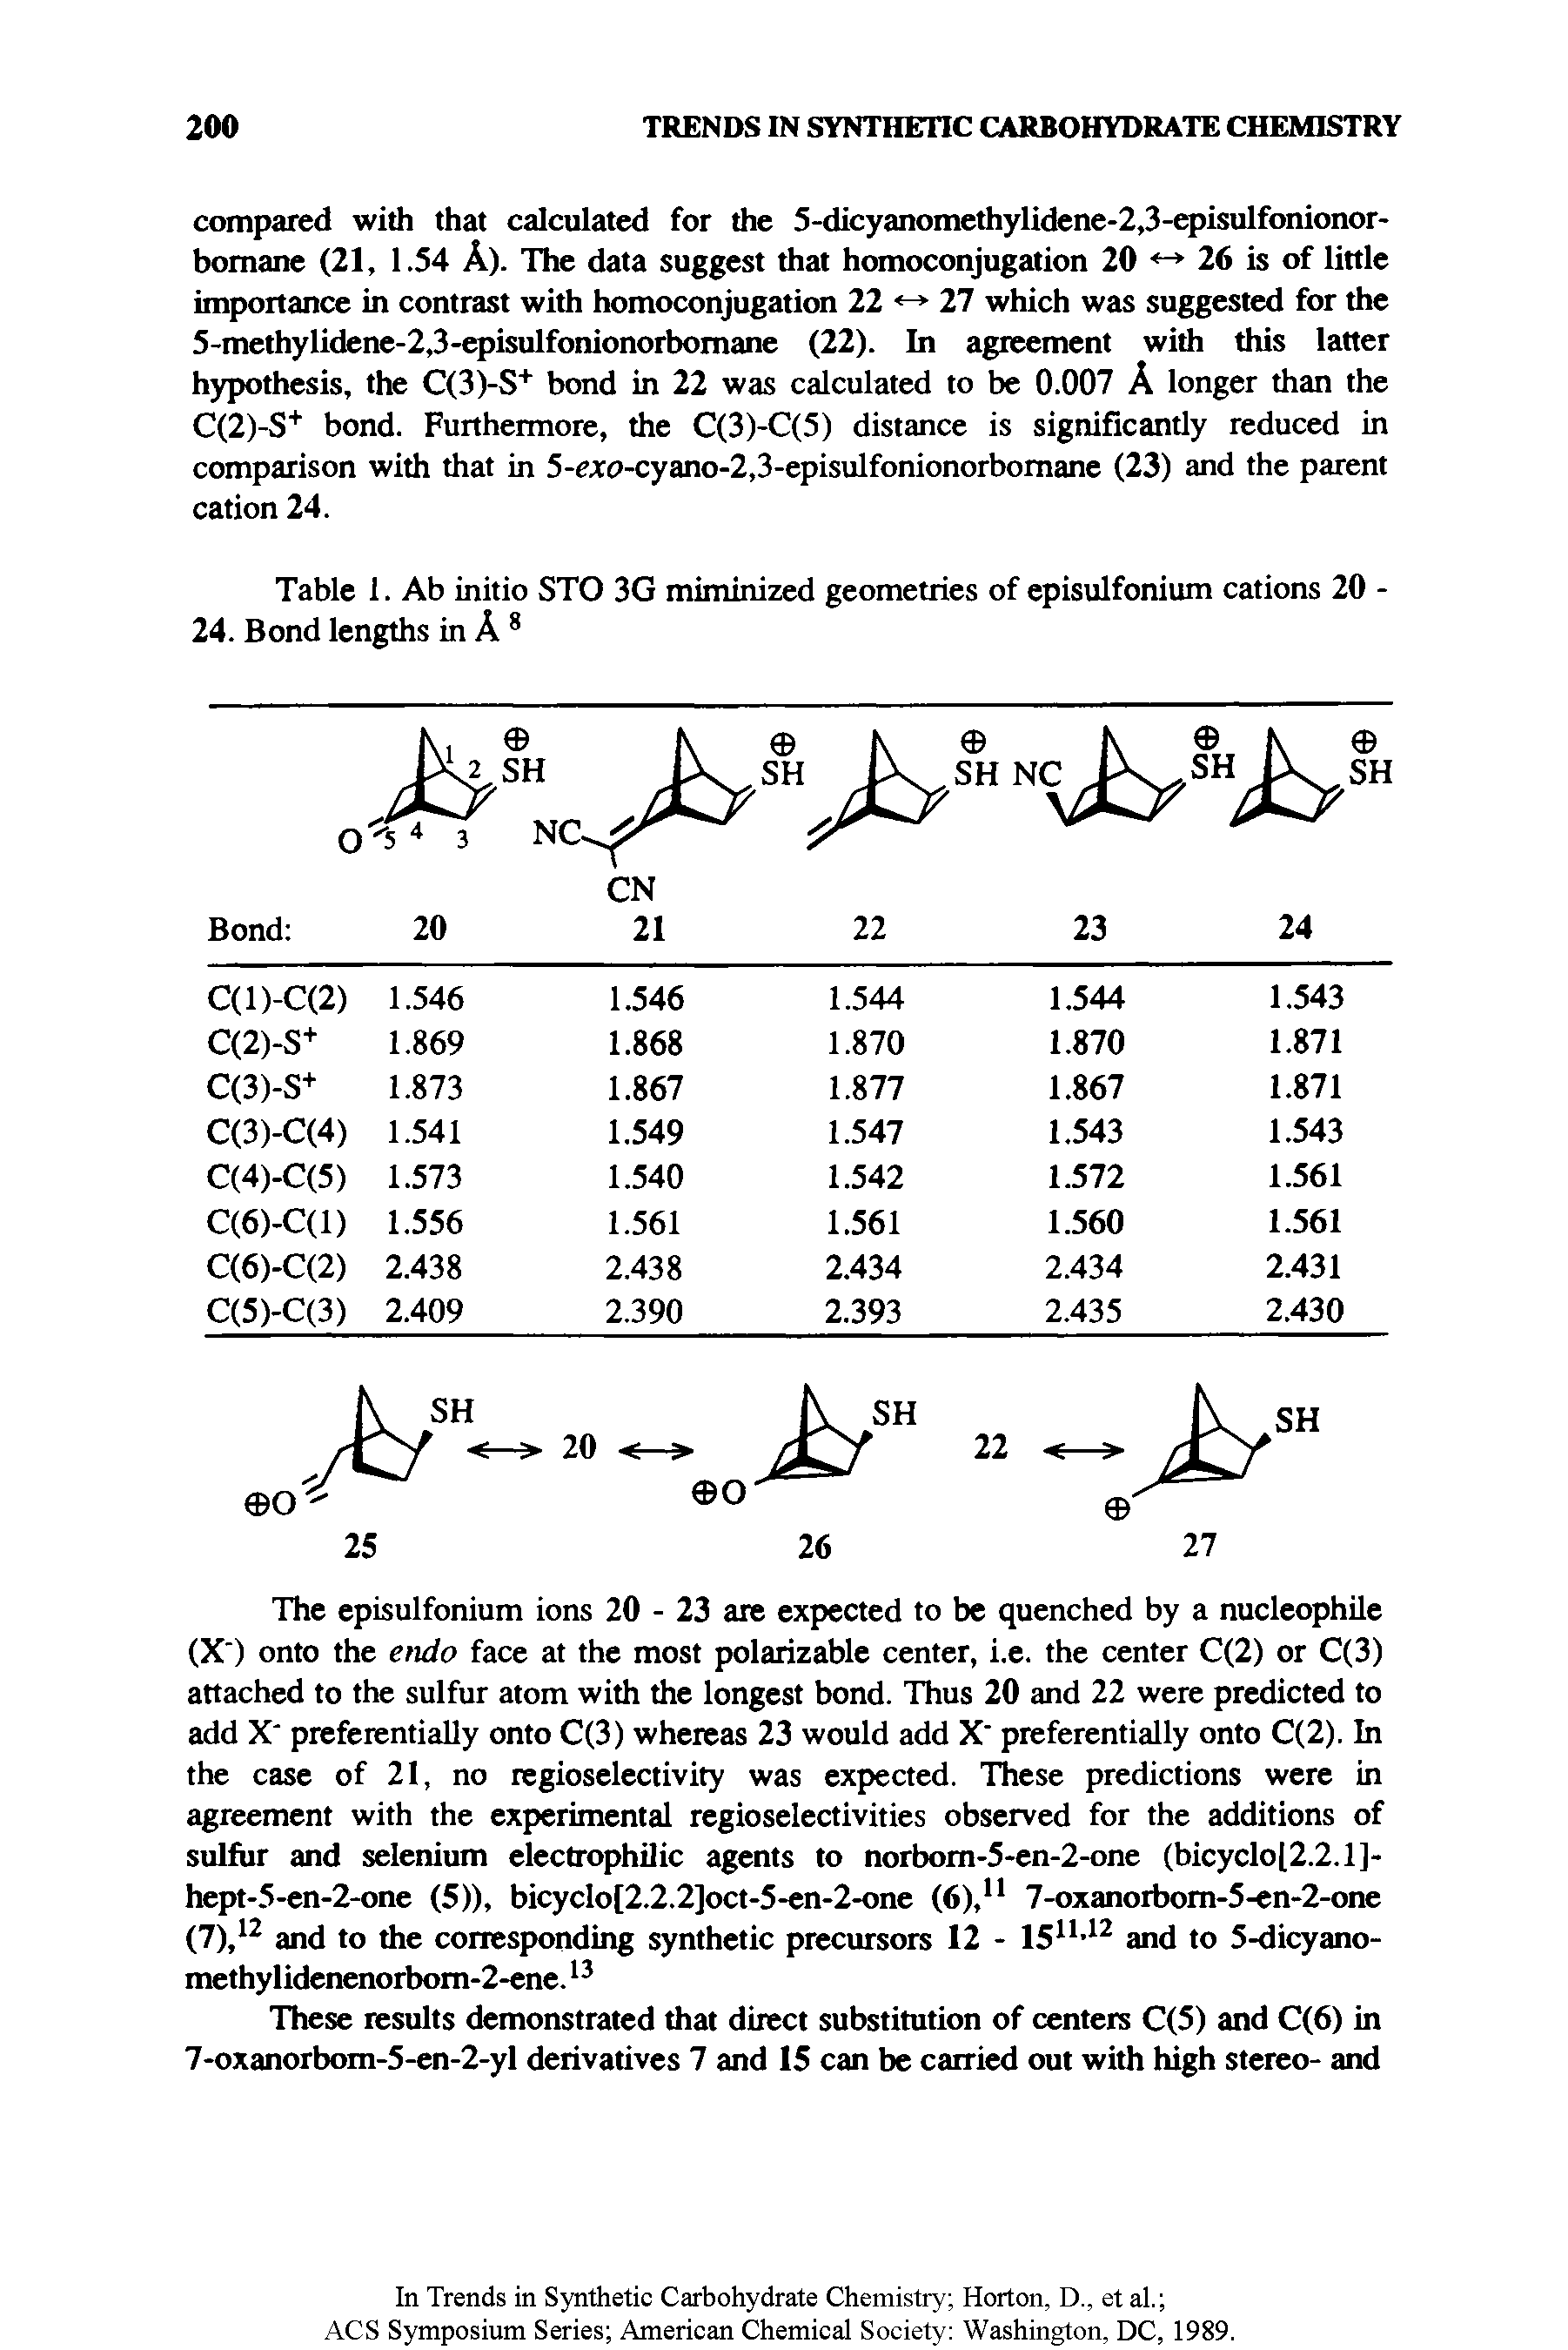 Table 1. Ab initio STO 3G miminized geometries of episulfonium cations 20 -24. Bond lengths in A ...